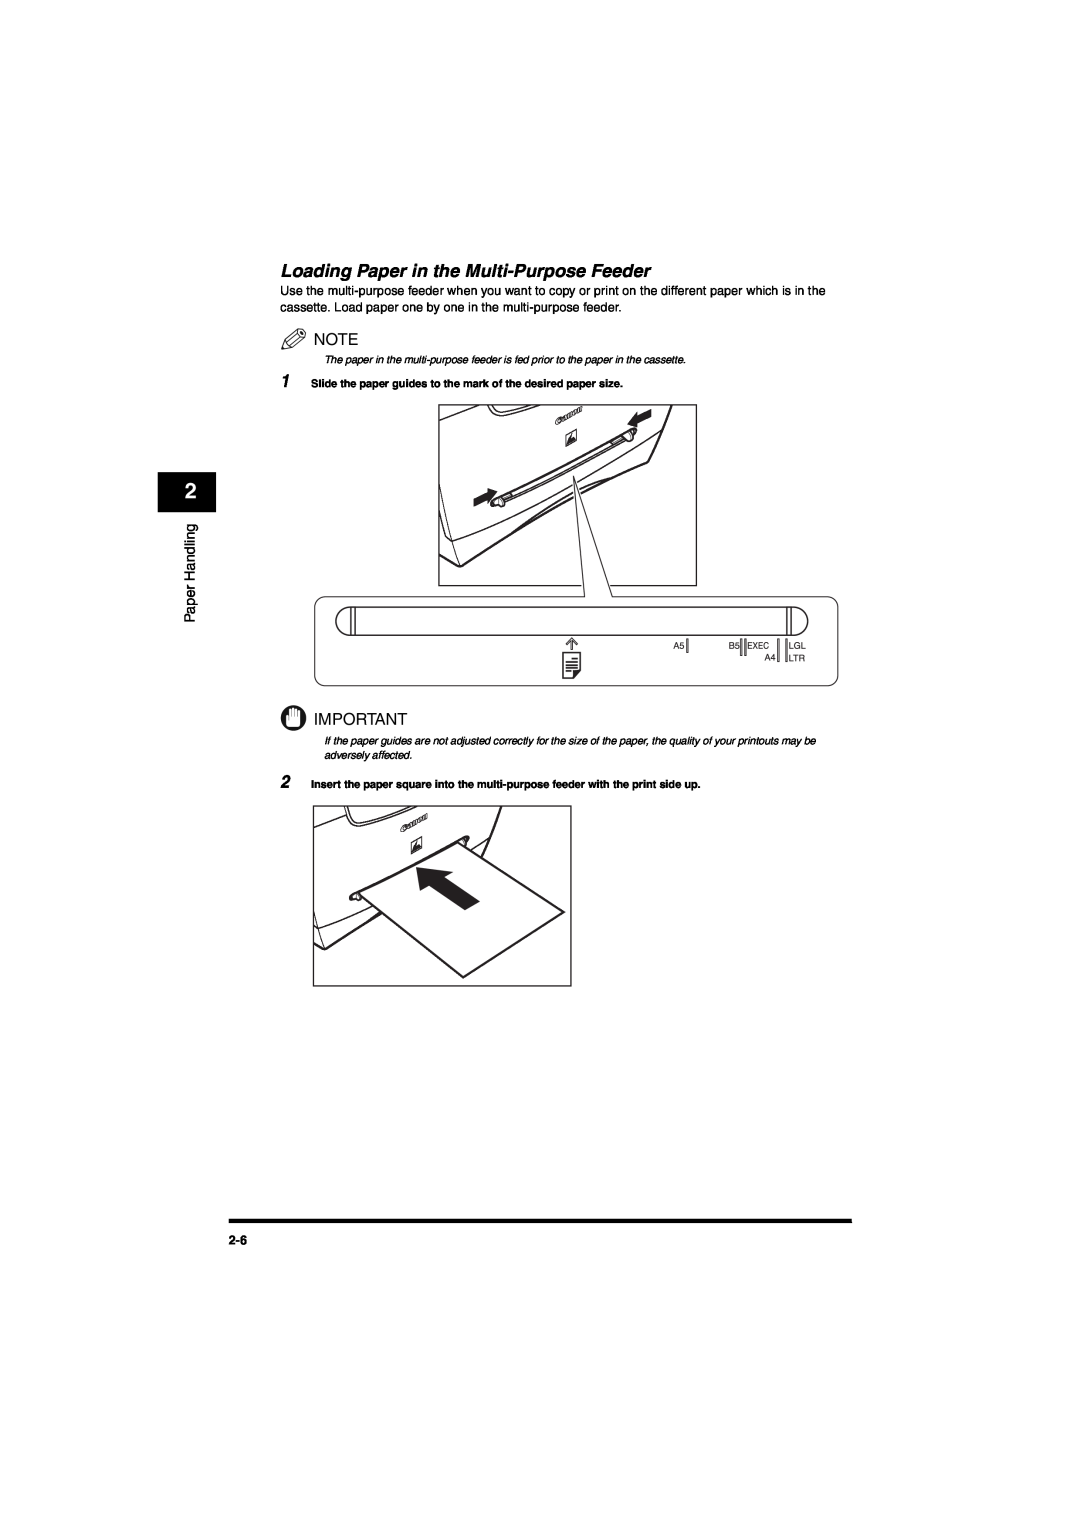 Canon MF5650 manual Loading Paper in the Multi-Purpose Feeder, Paper Handling 